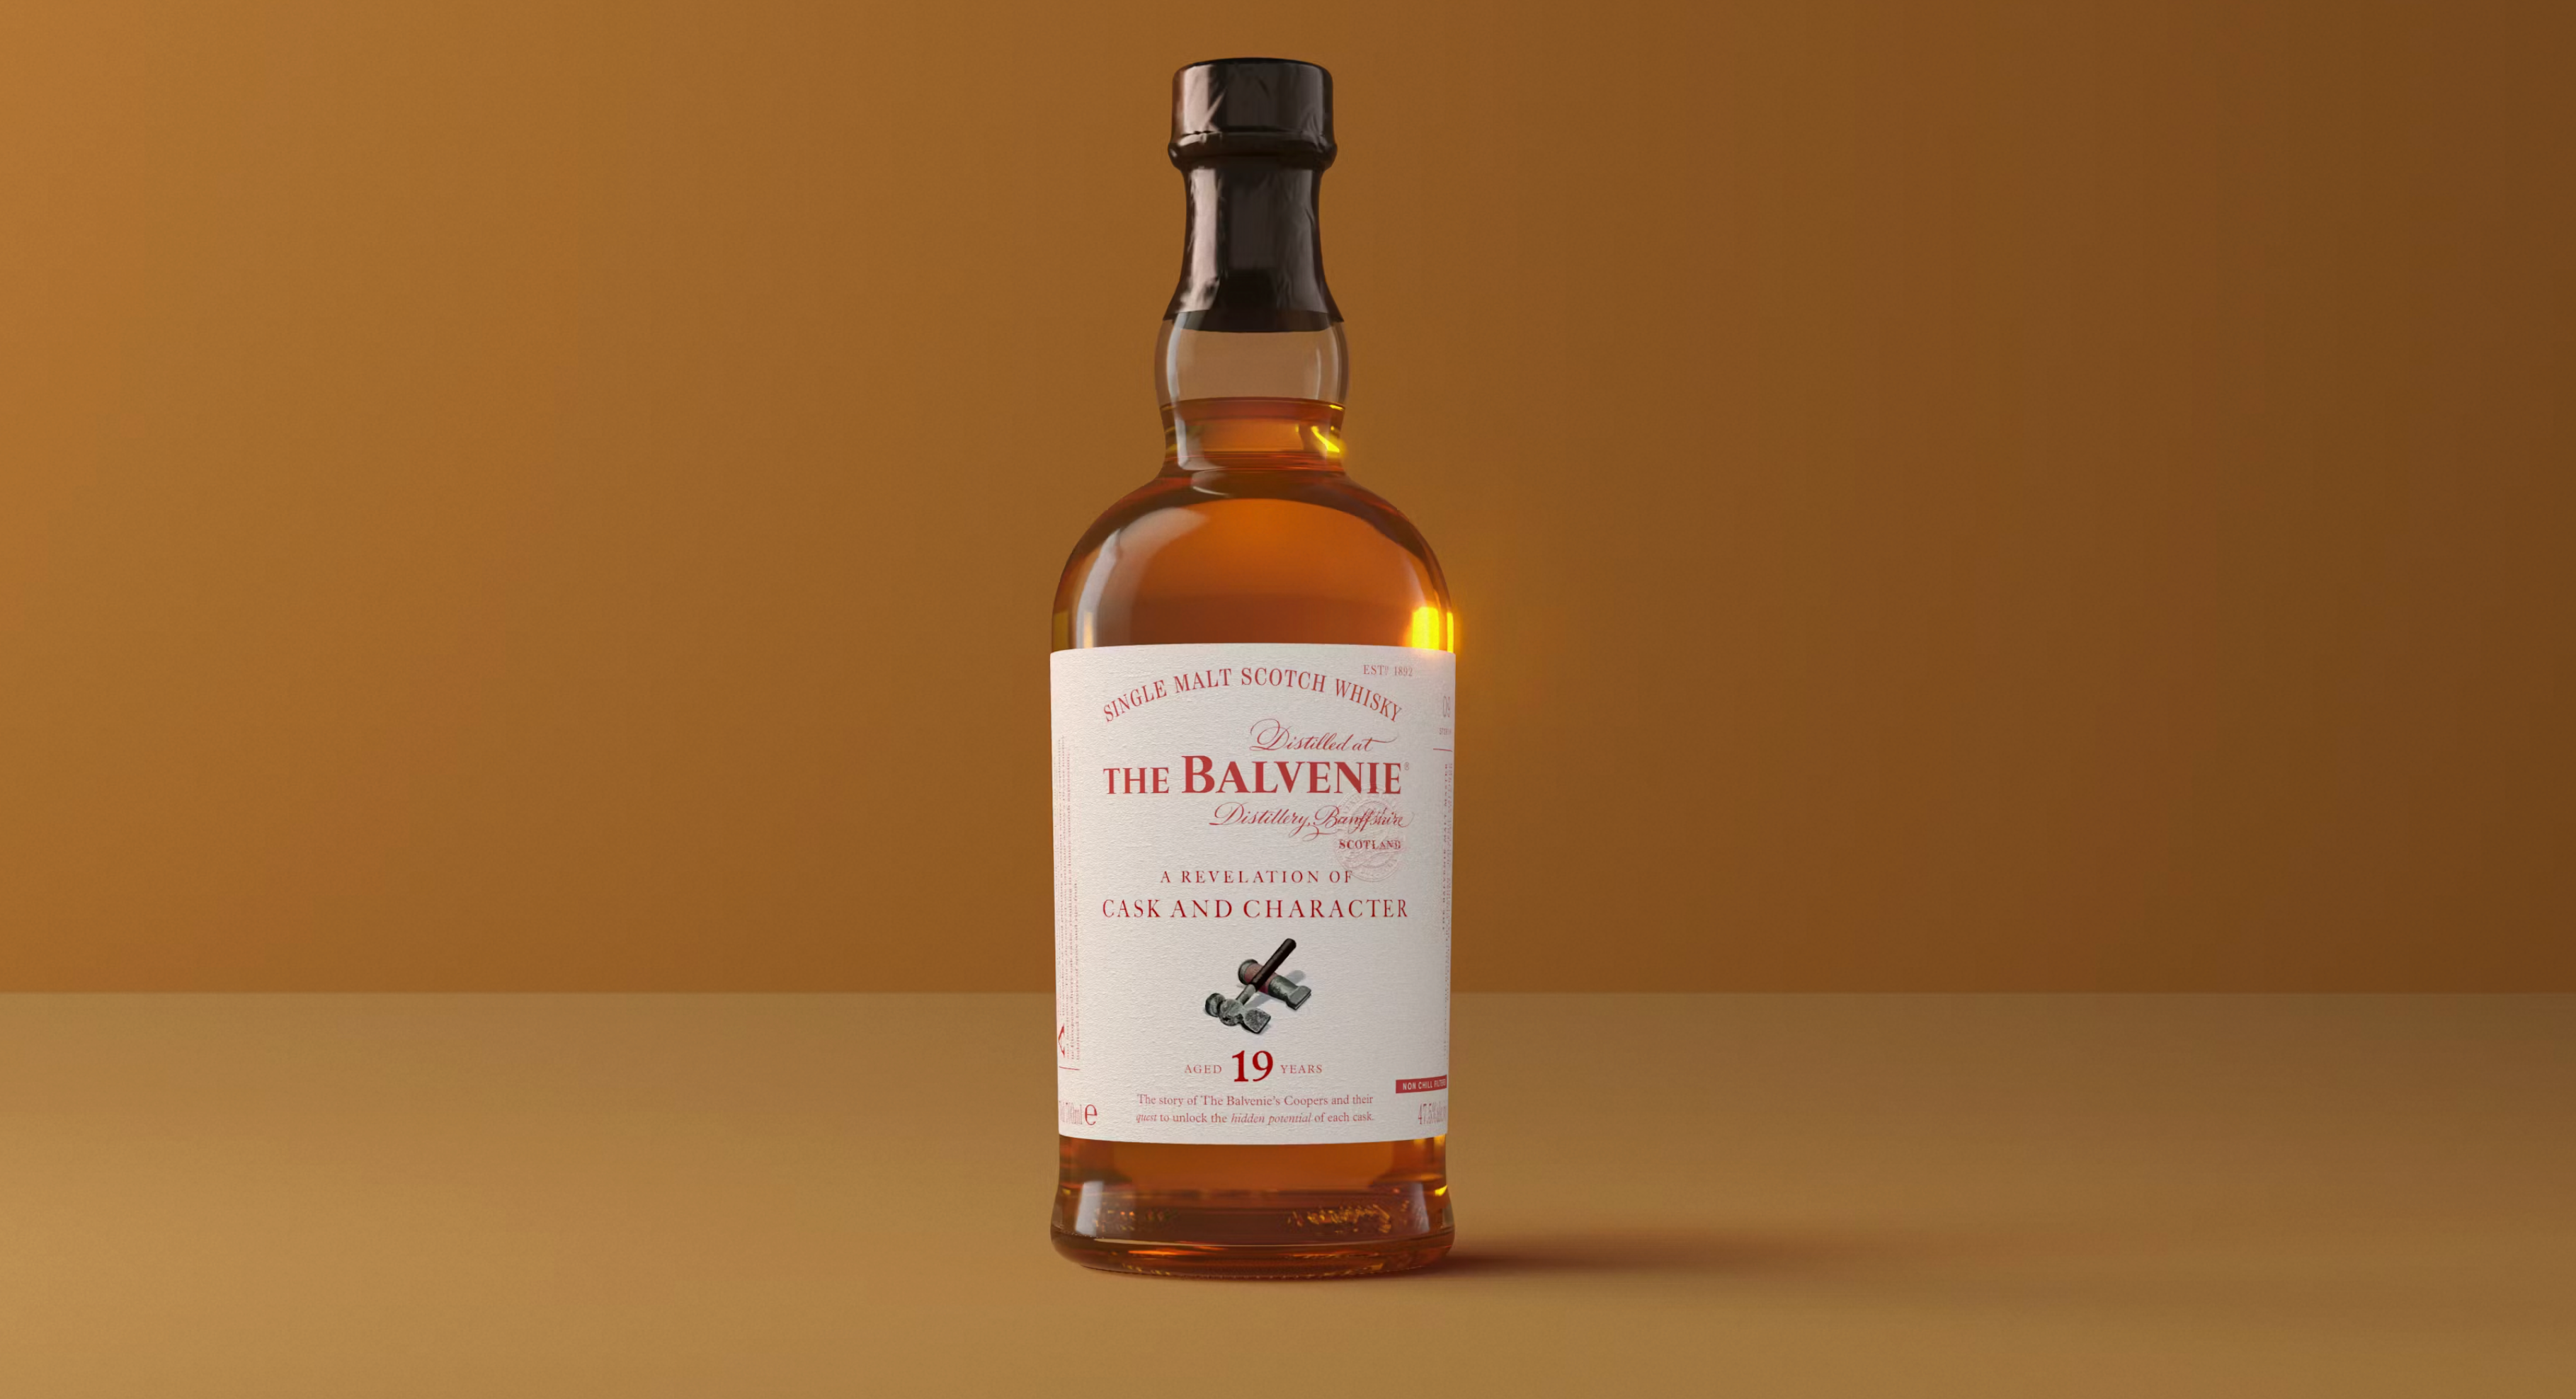 Balvenie 19 Year A Revelation of Cask and Character Scotch